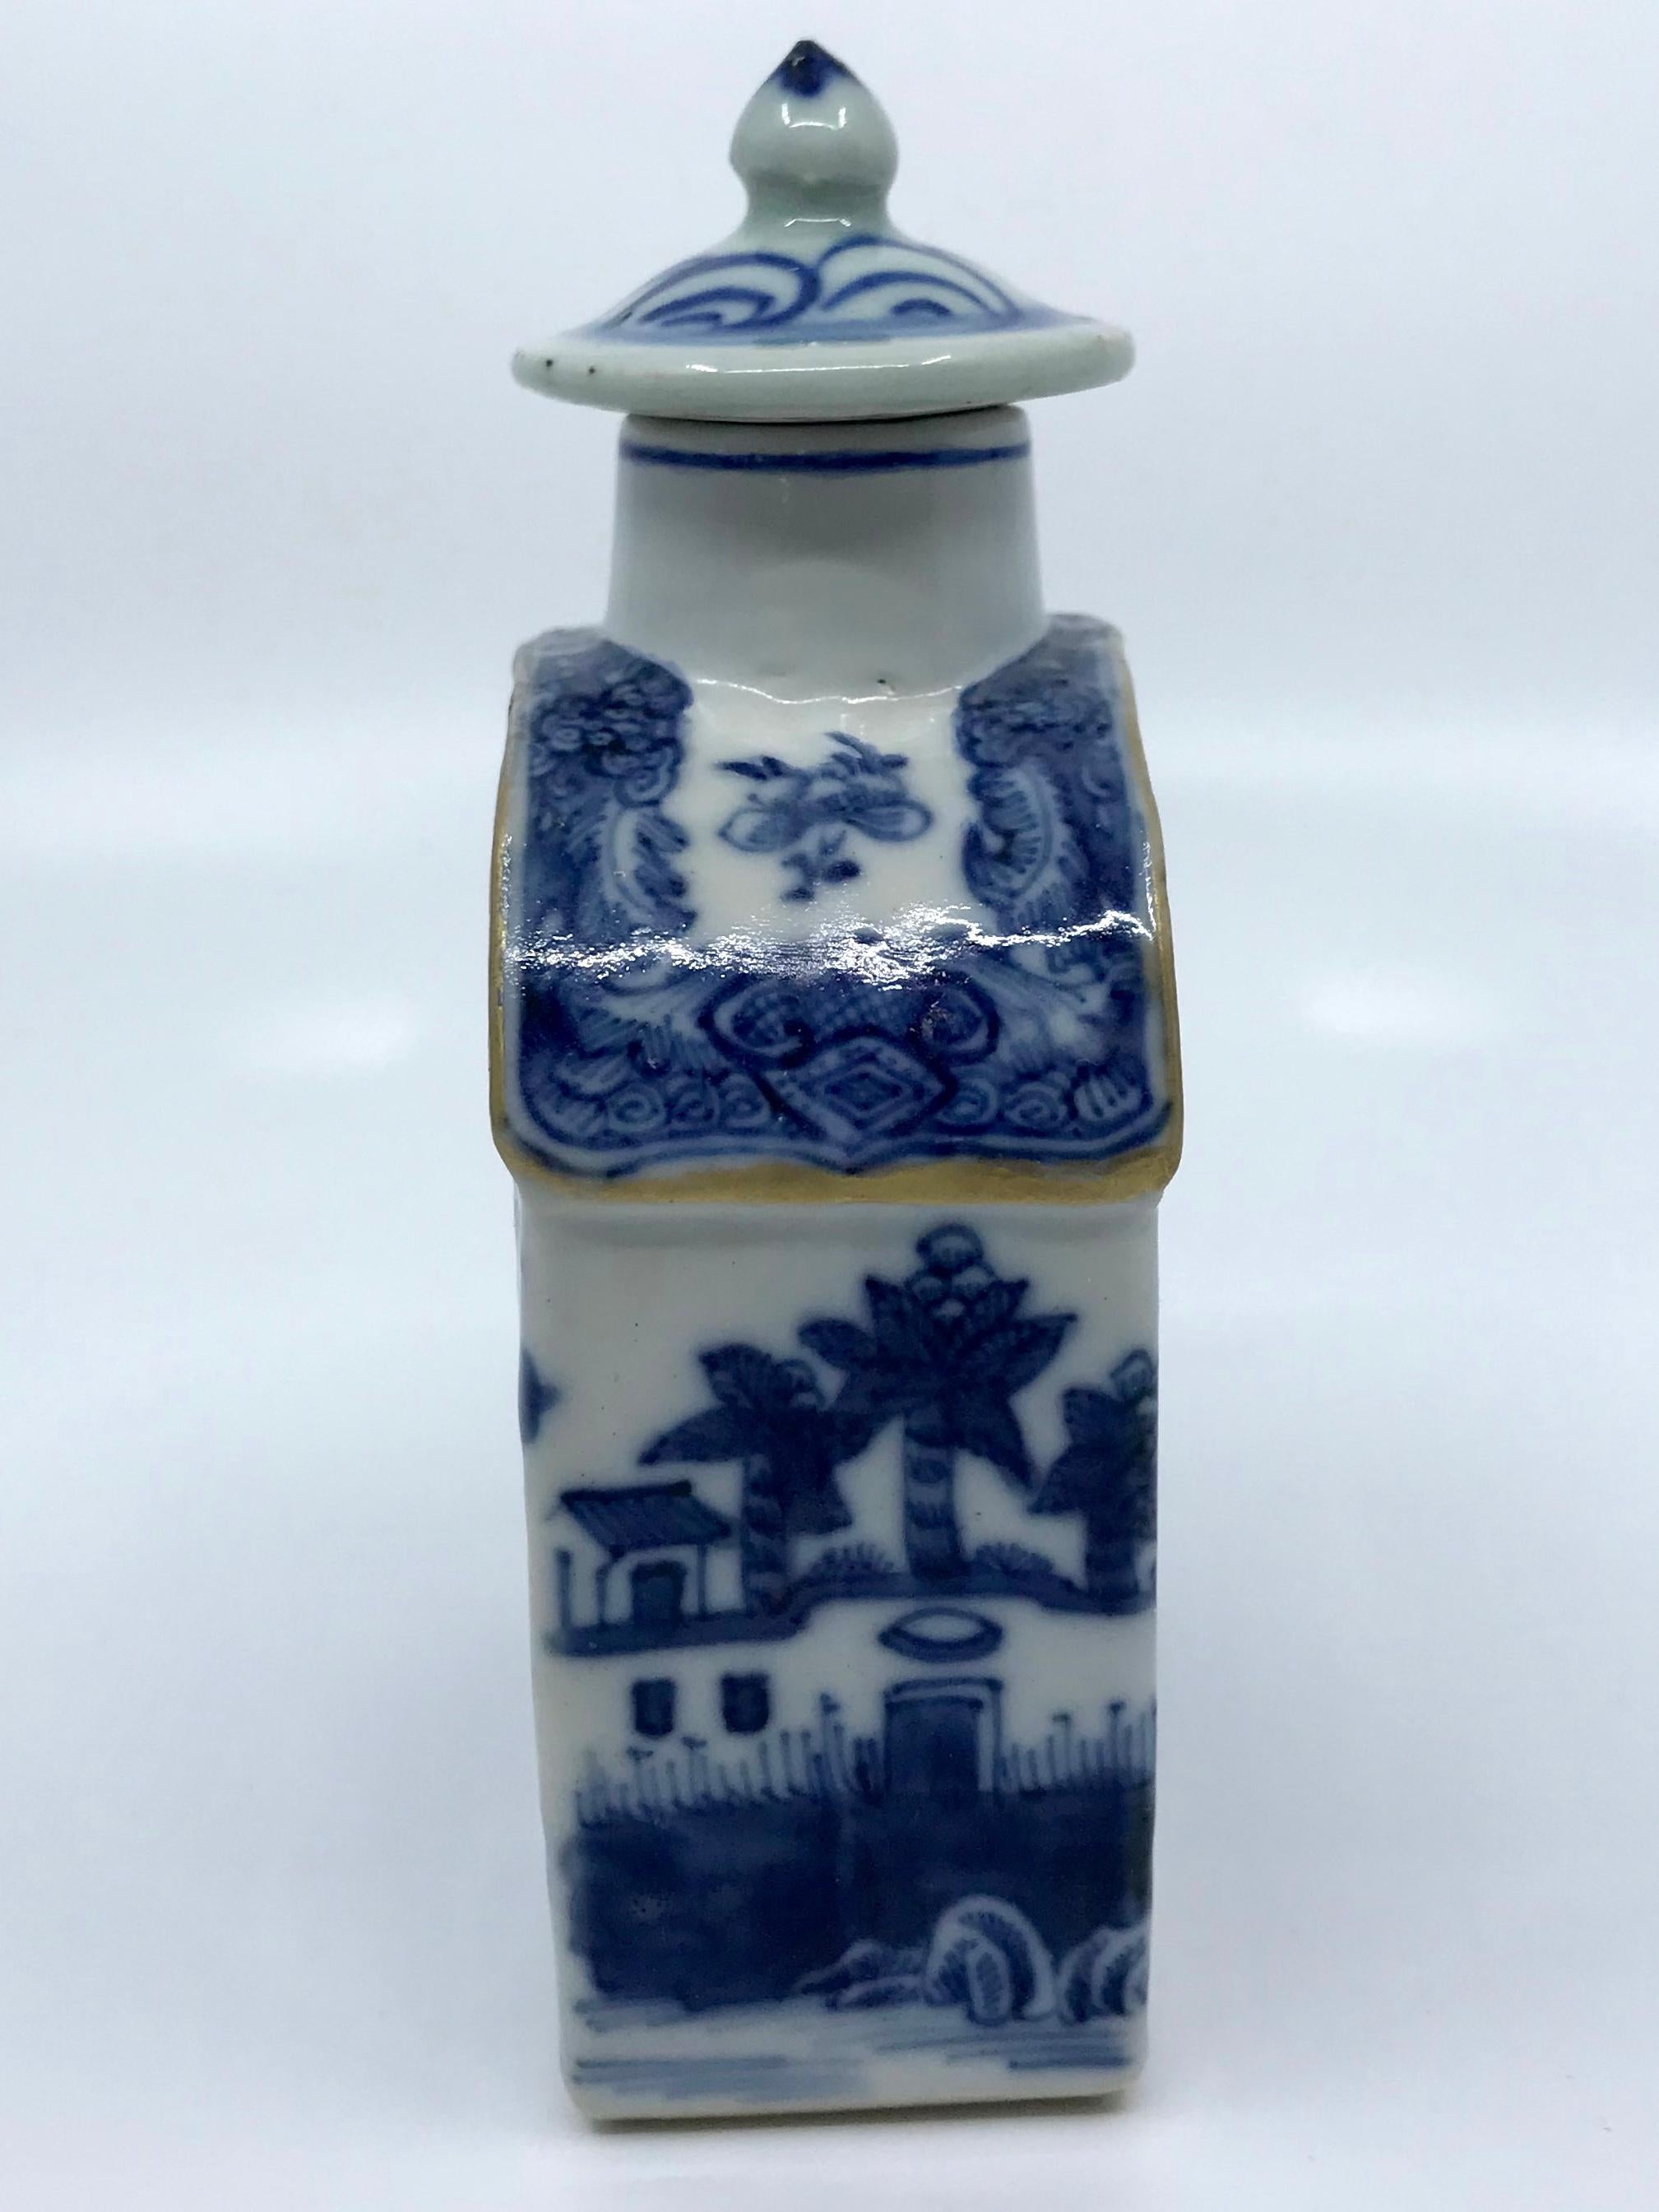 Blue and white Chinese export tea caddy. Vibrant blue pagodas and chinoiserie landscapes cover the sides and end panels of this bow-top shaped tea canister with gilding and later associated top. China, 1830's.
Dimensions: 3.5